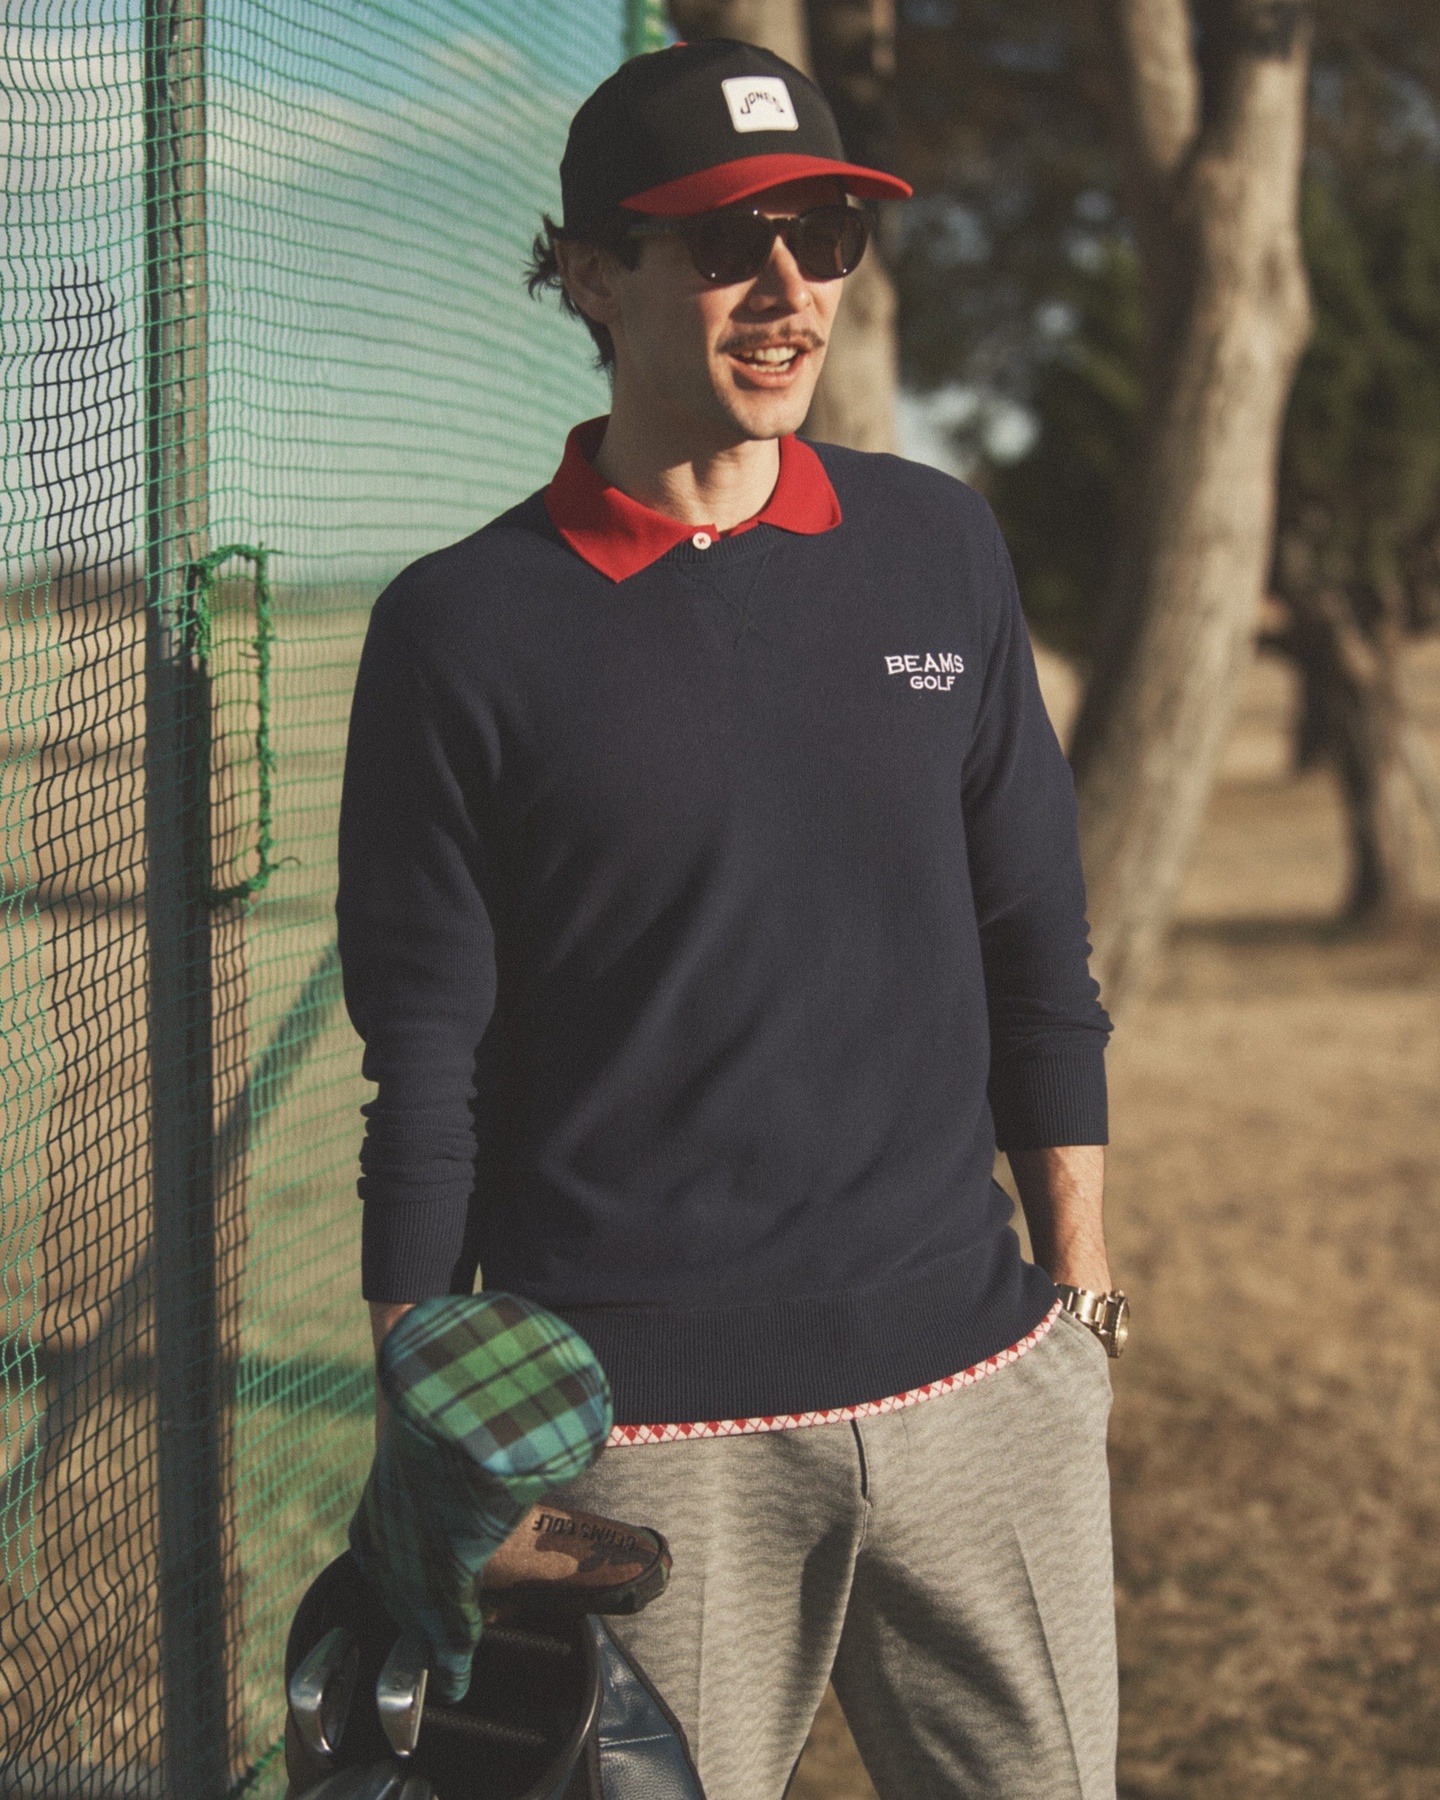 The New Style for City Golfers | BEAMS GOLF MAGAZINE｜BEAMS GOLF（ビームス ゴルフ）